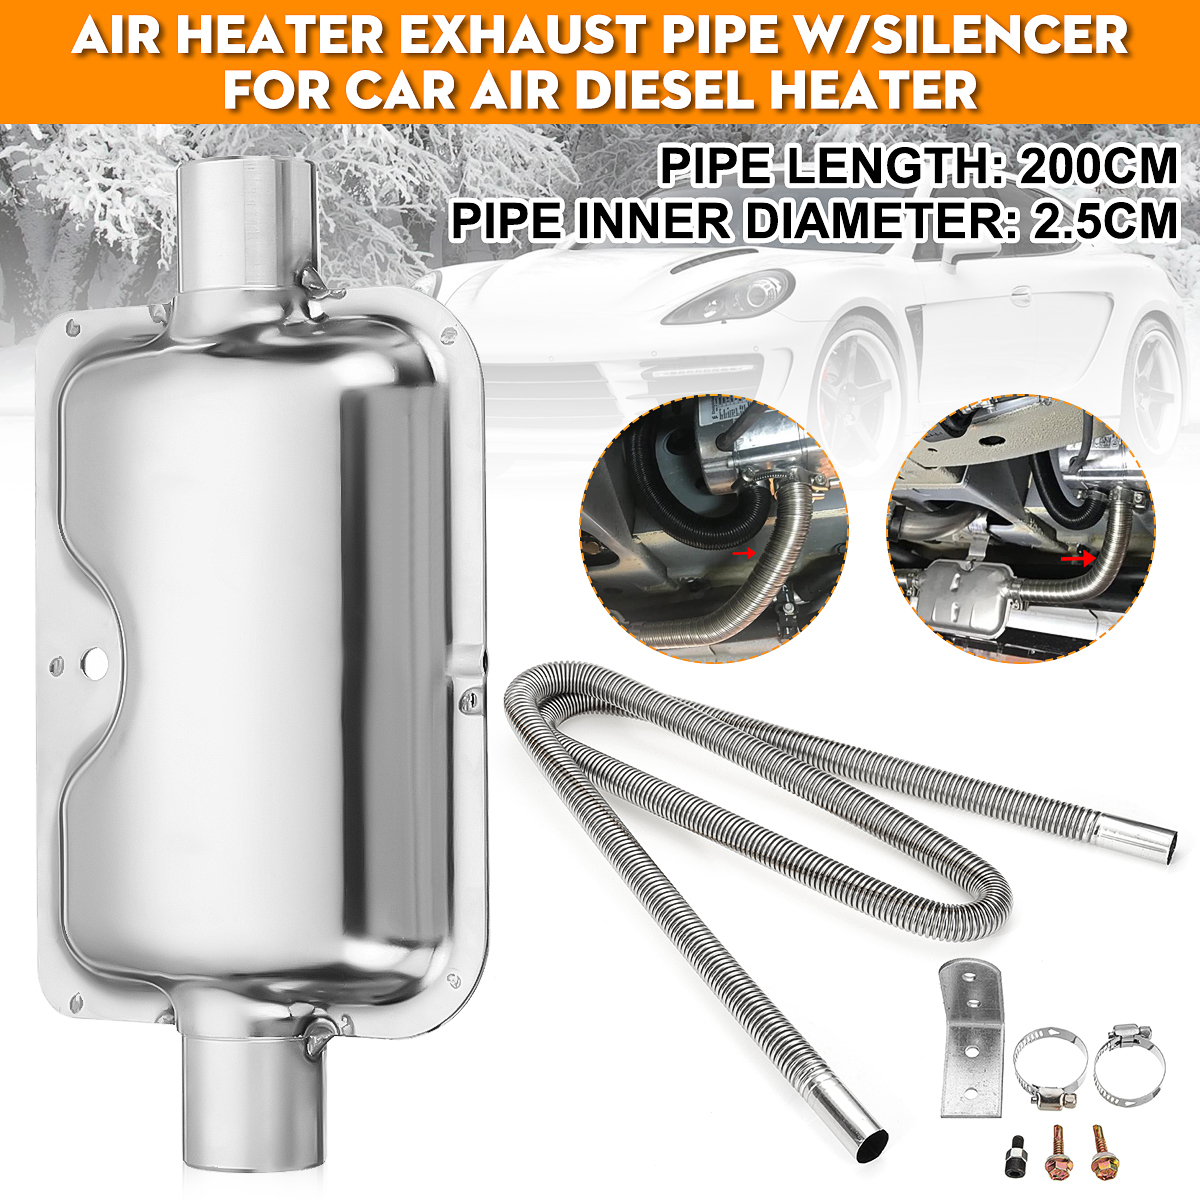 200cm-Stainless-Steel-Exhaust-Pipe-With-Silencer-For-Car-Parking-Air-Diesel-Heater-1593977-1